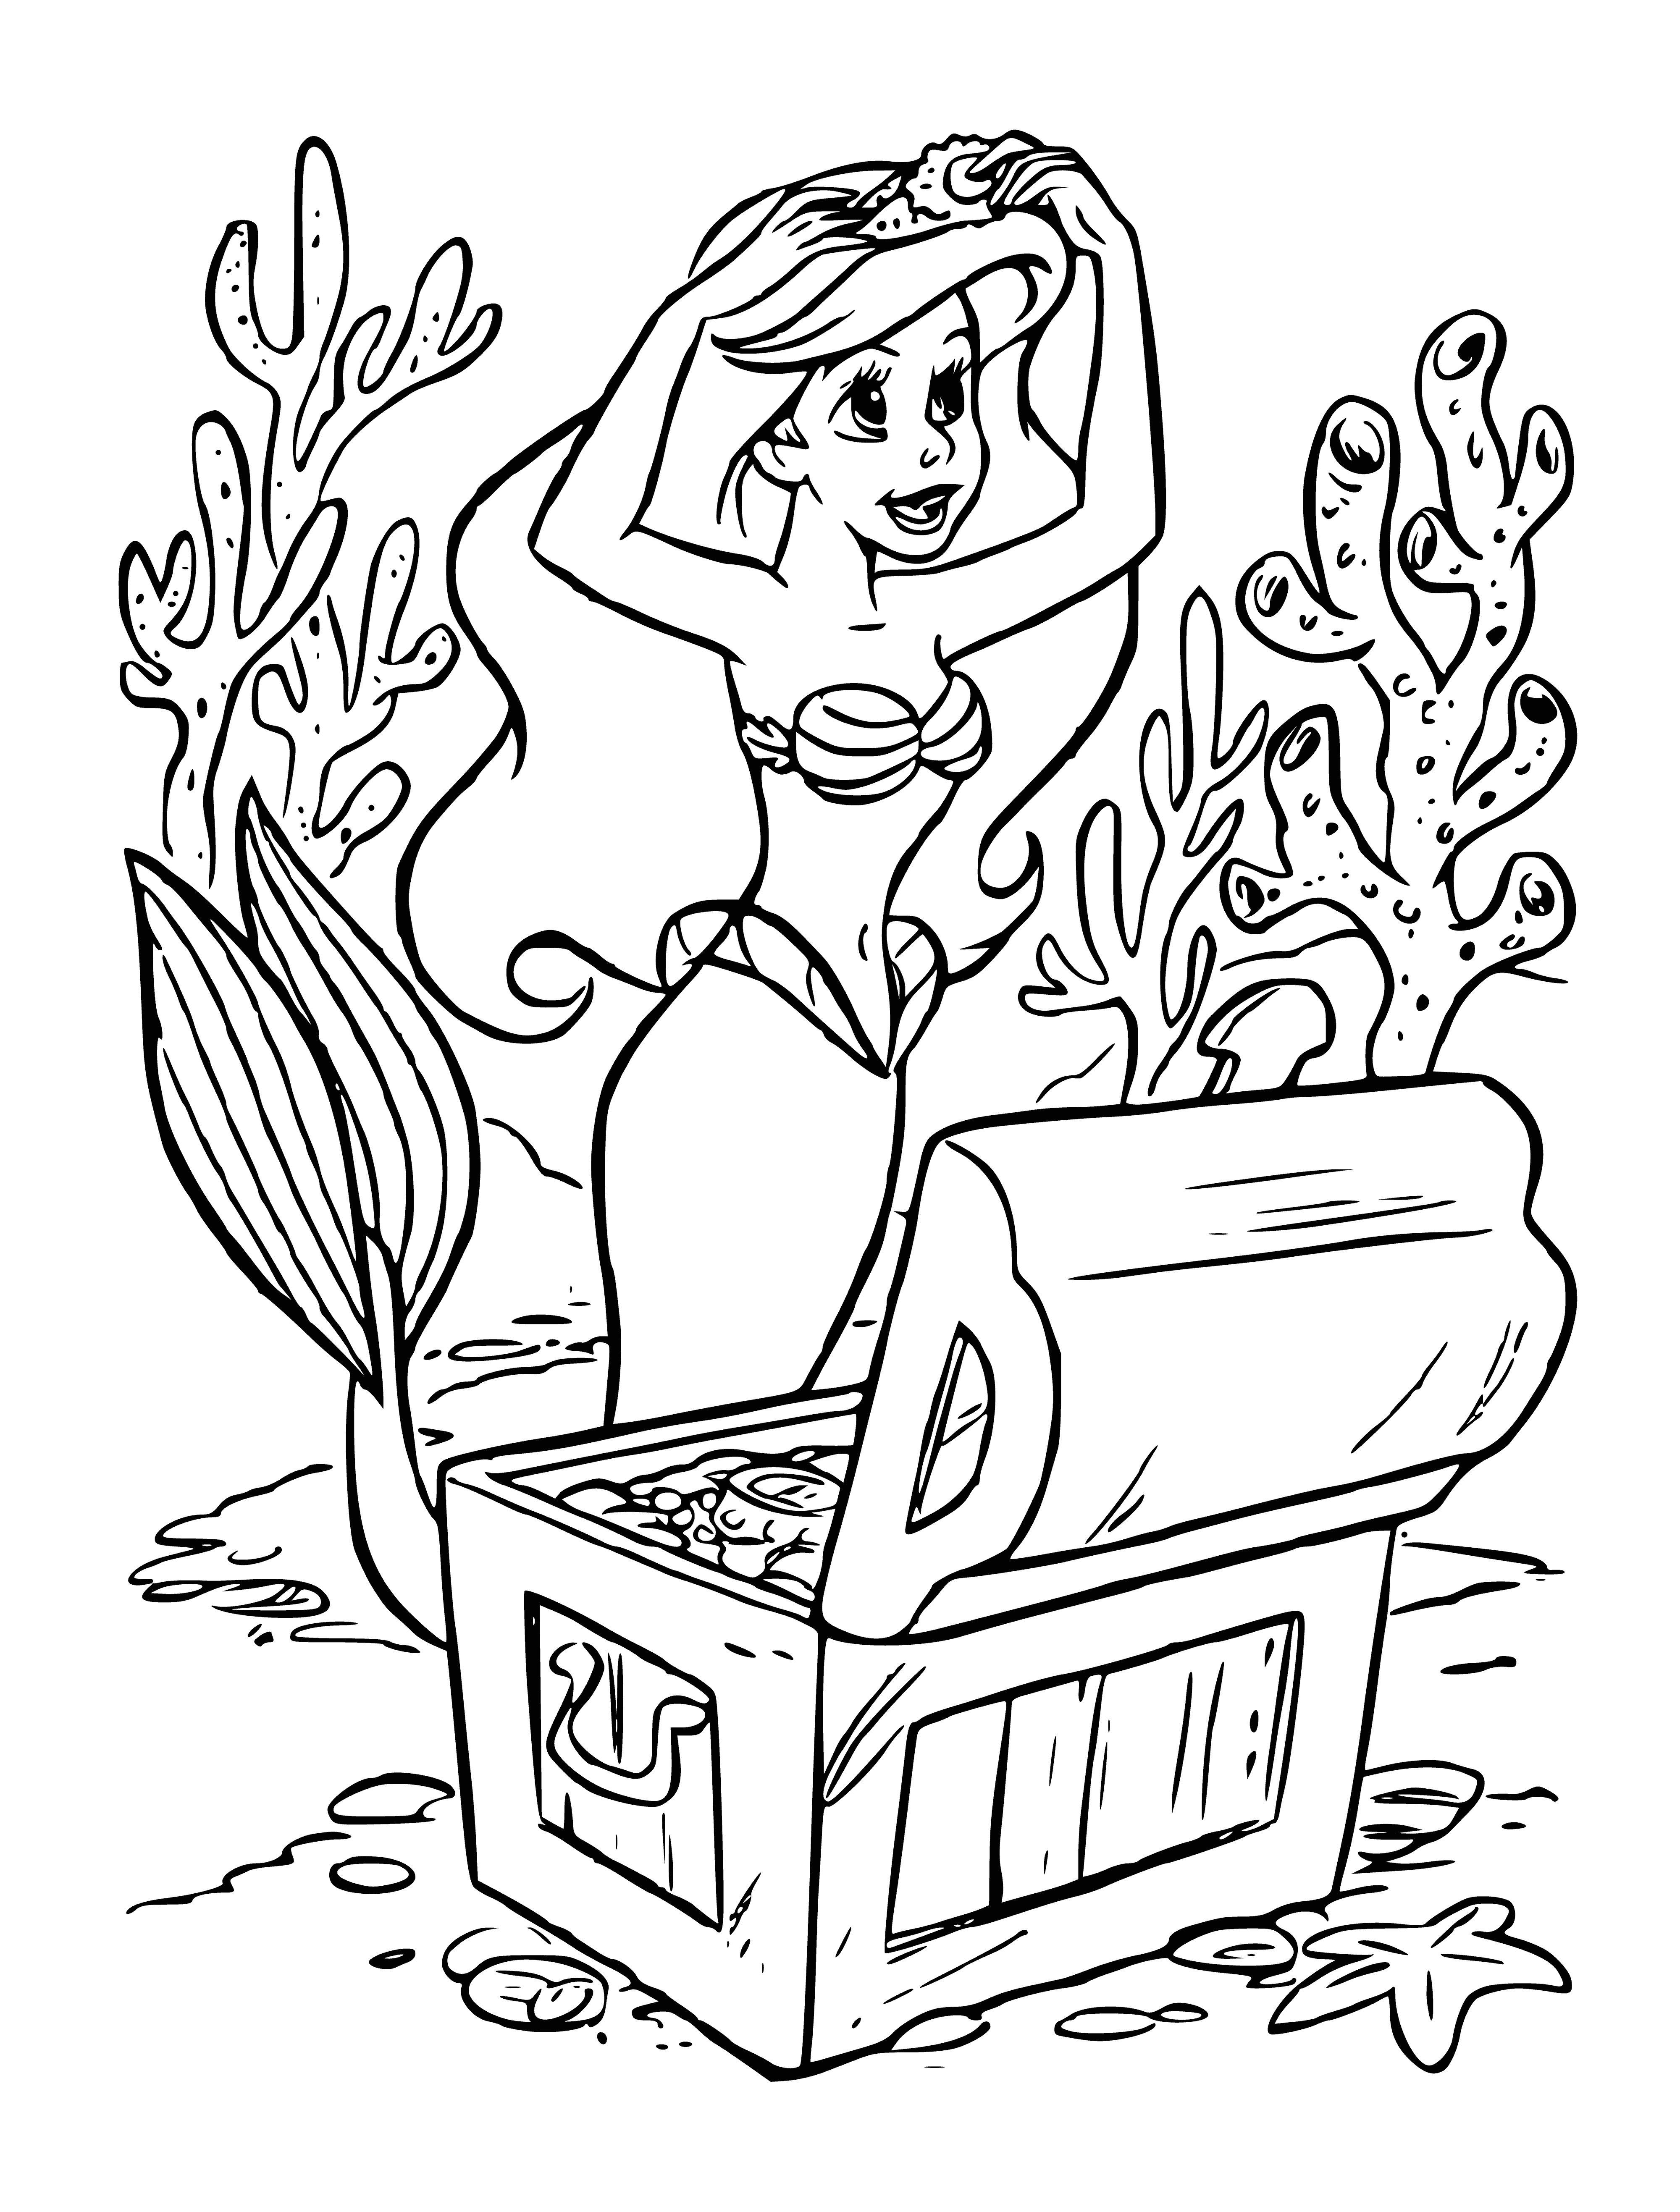 coloring page: Mermaid surrounded by treasure trove of jewels, seashells looks content and happy.